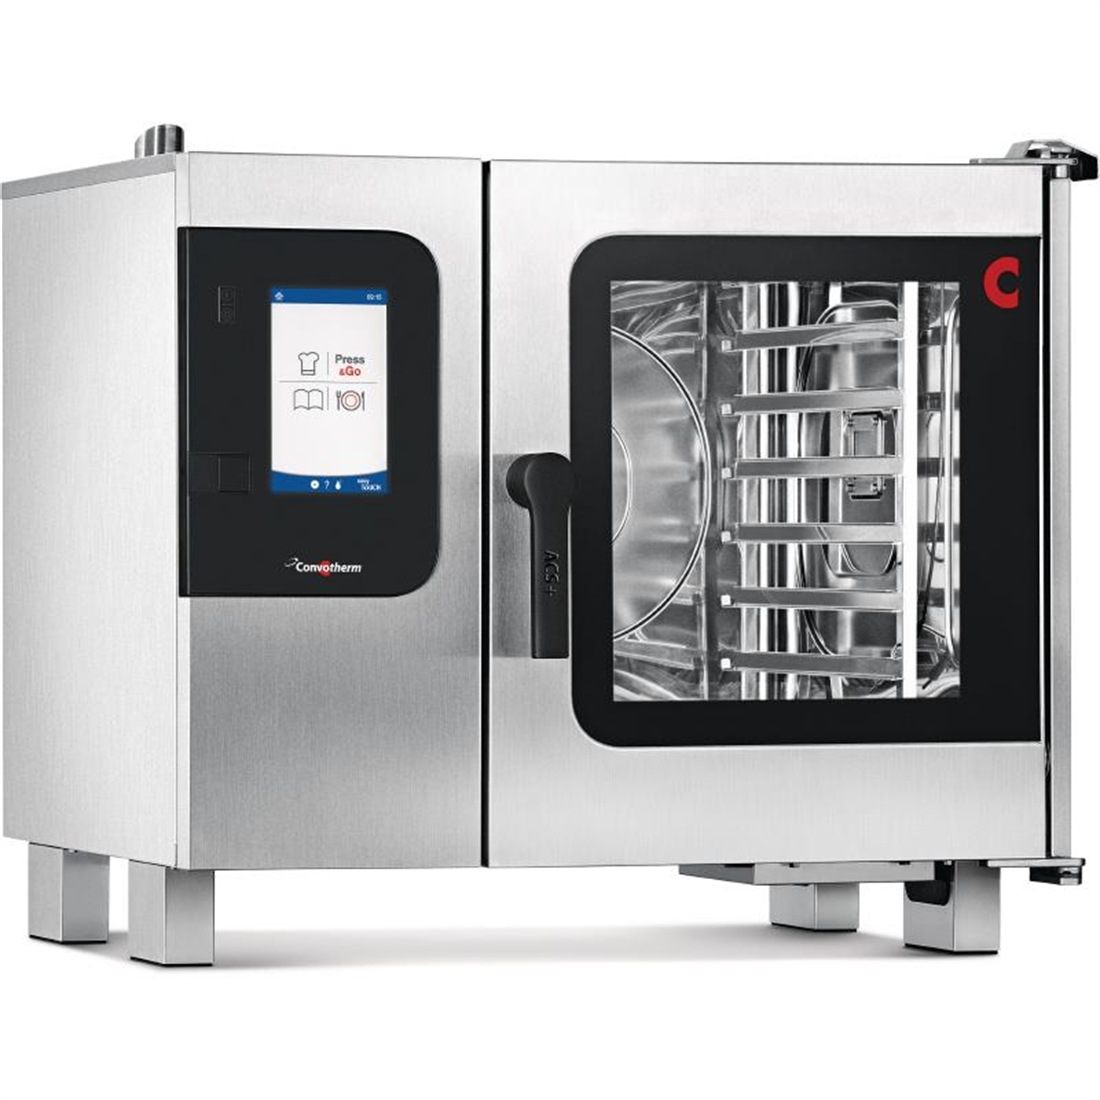 Convotherm 4 easyTouch Combi Oven 6 x 1 x1 GN Grid with Smoker and Install